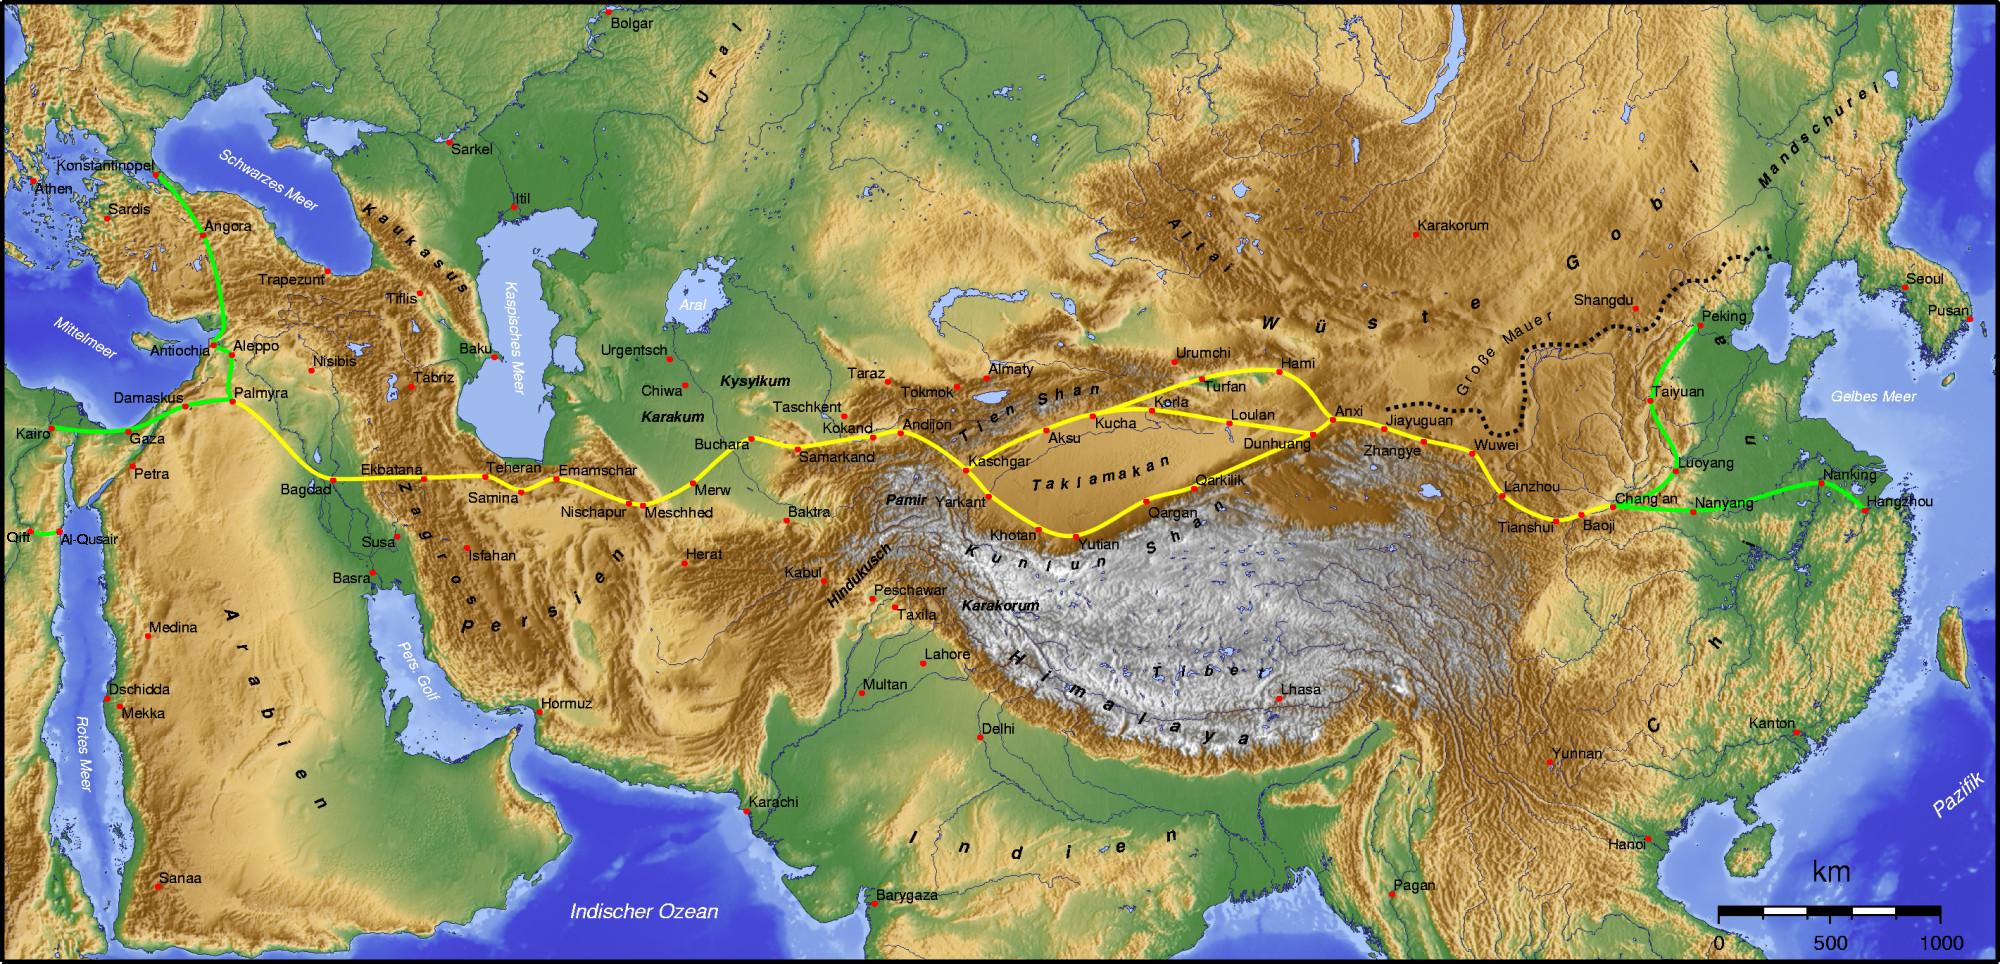 The West's eventual jump in technology and innovation, as well as in capitalism and commerce, was enormously helped by one thing Genghis did. He didn't do it to help us, but he clearly did do it on purpose: he took over and opened up the Silk Road.
The Silk Road is the trade route between China and the Middle East as well as southern Europe. And specifically, the part between Persia (modern day Iran) and Western China.  This was, before the advent of more advanced navigation, a vital lane for the shipping of goods, but also of ideas.  And before Genghis, it was a wreck.  It had worked very well around the Roman times, when the Han Dynasty controlled one end and the Persians the other, but by the 13th century the whole road was an incredibly dangerous mix of tiny city-states, weak little kingdoms, and vast no-mans-lands filled with bandits.  Genghis wanted all the sweet riches that the Silk Road would provide through trade, so he swept through the region with 100000 men and took it all. Whole cities, some of them thousands of years old, ceased to exist if they defied him.
Remember the Khwarazmian Empire? Yeah, no one does. That's because they defied Genghis. It ceased to exist. Genghis' Mongols slaughtered well over a million people in that campaign alone.

But after all this bloodshed, something very important happened: the Mongol-controlled silk road was open, safer, and didn't require any border checks because it was unified. Bandits were ruthlessly pursued. Merchants from Europe (like Marco Polo) could now travel through it with much greater safety than would have been possible before (not that it was 'safe' by modern standards, just a lot safer than it was a century earlier).  Genghis even set up one of the first international postage systems along the Silk Road, with offices lined up along the route that allowed messages to travel at a stunning rate of about 150 miles a day!

This brought commerce to Europe that sped up its development. It also brought several important new inventions; like paper money, and the printing press.  These weren't Mongol inventions, they were mostly thought up by the Song Chinese, but until Genghis opened the Silk Road they couldn't get to Europe.
There was another very important invention (also invented by the Chinese) that Genghis would bring to the west, one that would help the West eventually conquer the world: gunpowder.